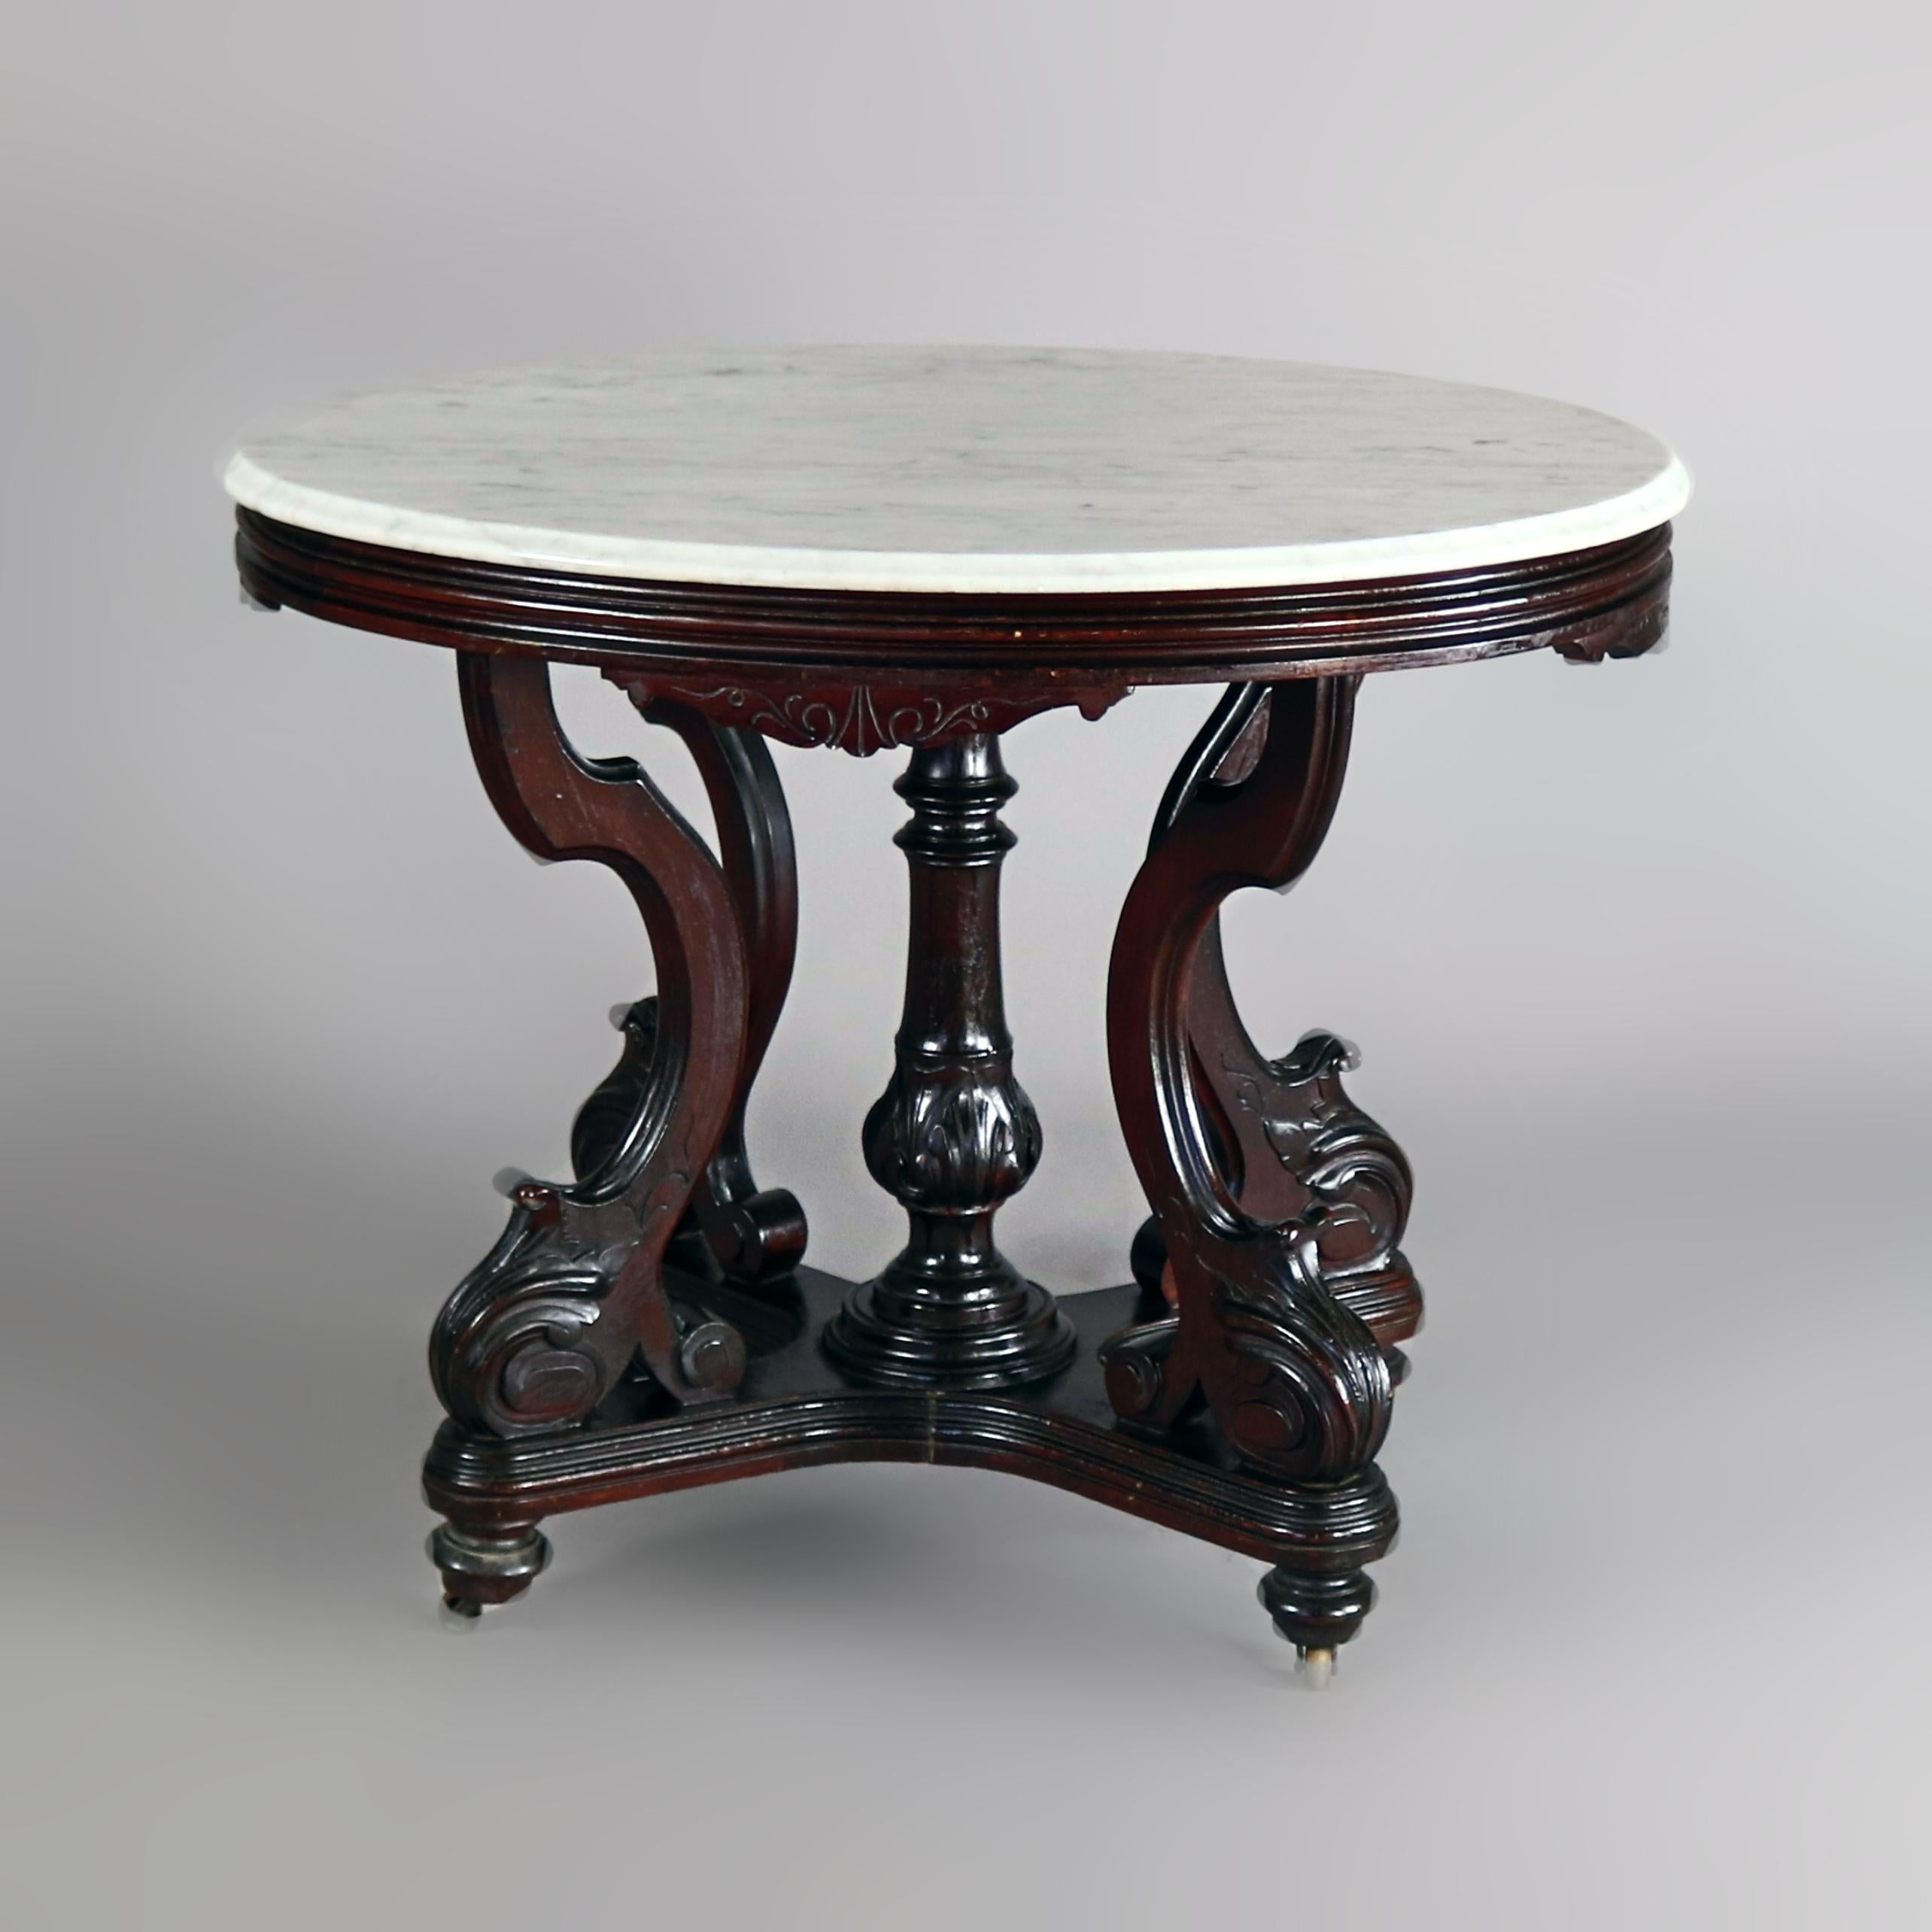 American Antique Victorian Carved Walnut and Marble Center Table, circa 1880